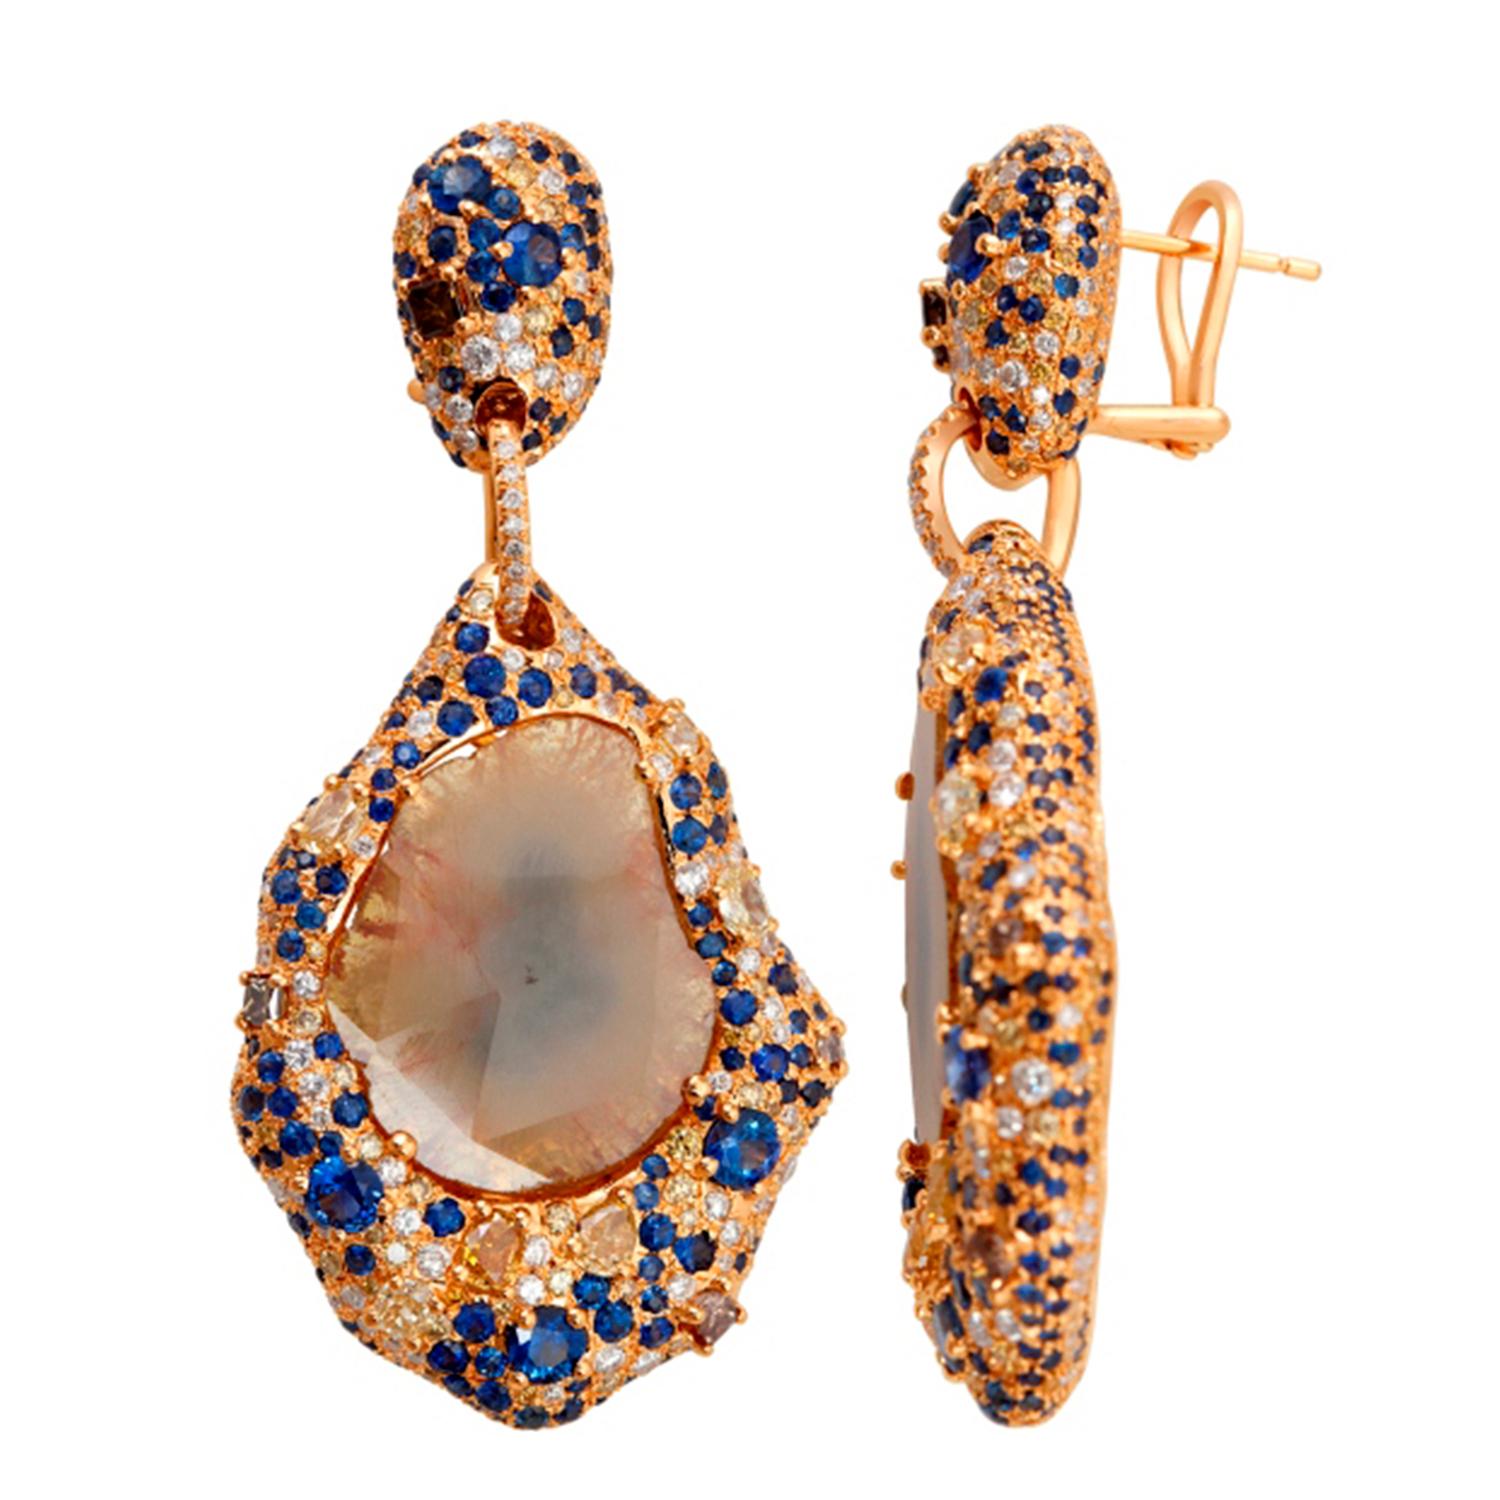 Artisan Sliced Diamonds Earring Accented with Pave Diamonds & Sapphire in 18k Gold For Sale